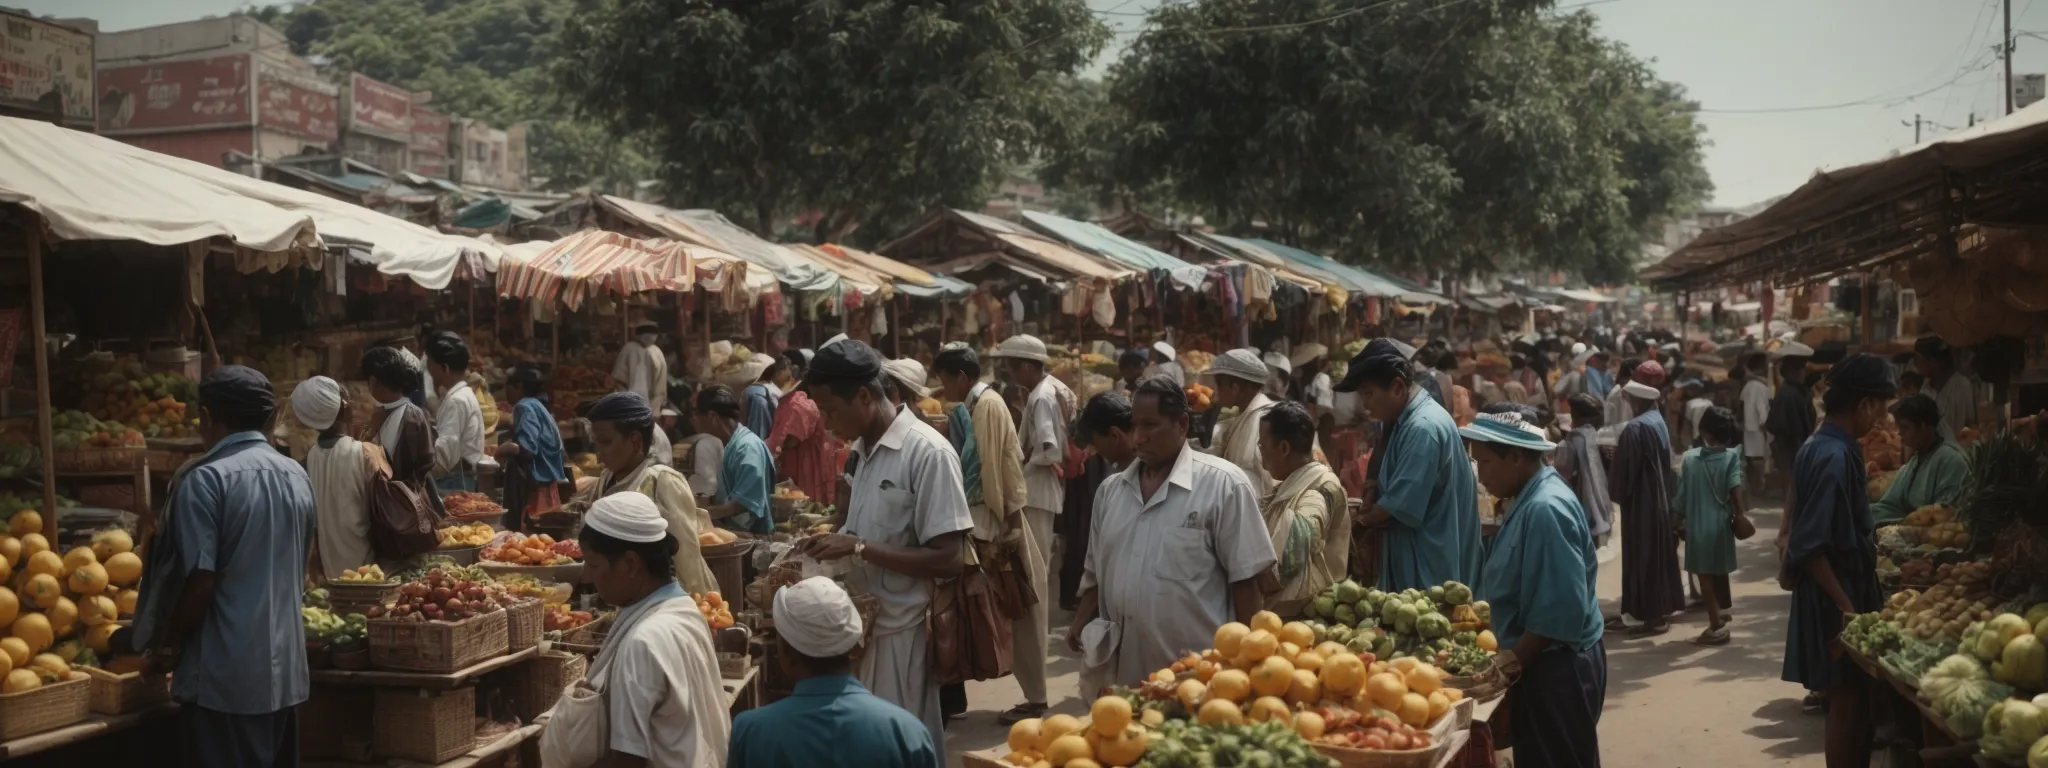 a bustling local market with vendors engaging with community members.